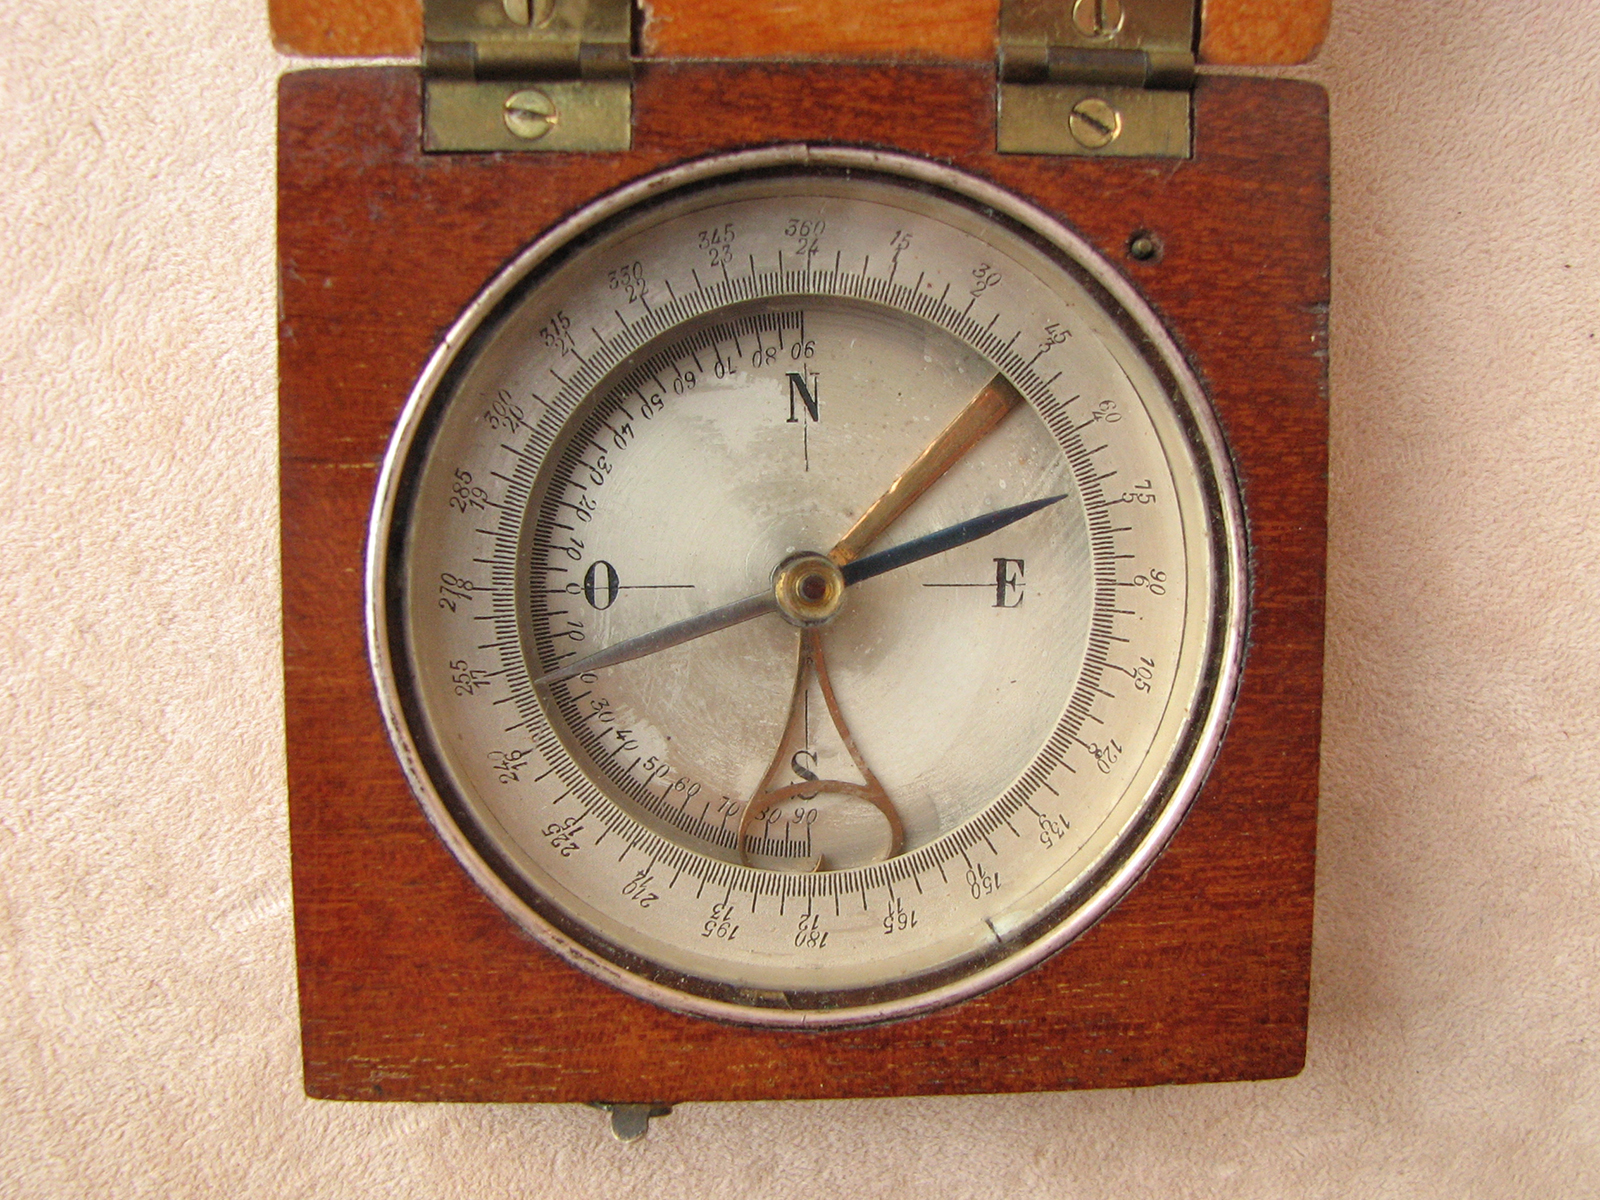 Mahogany cased compass with clinometer arm